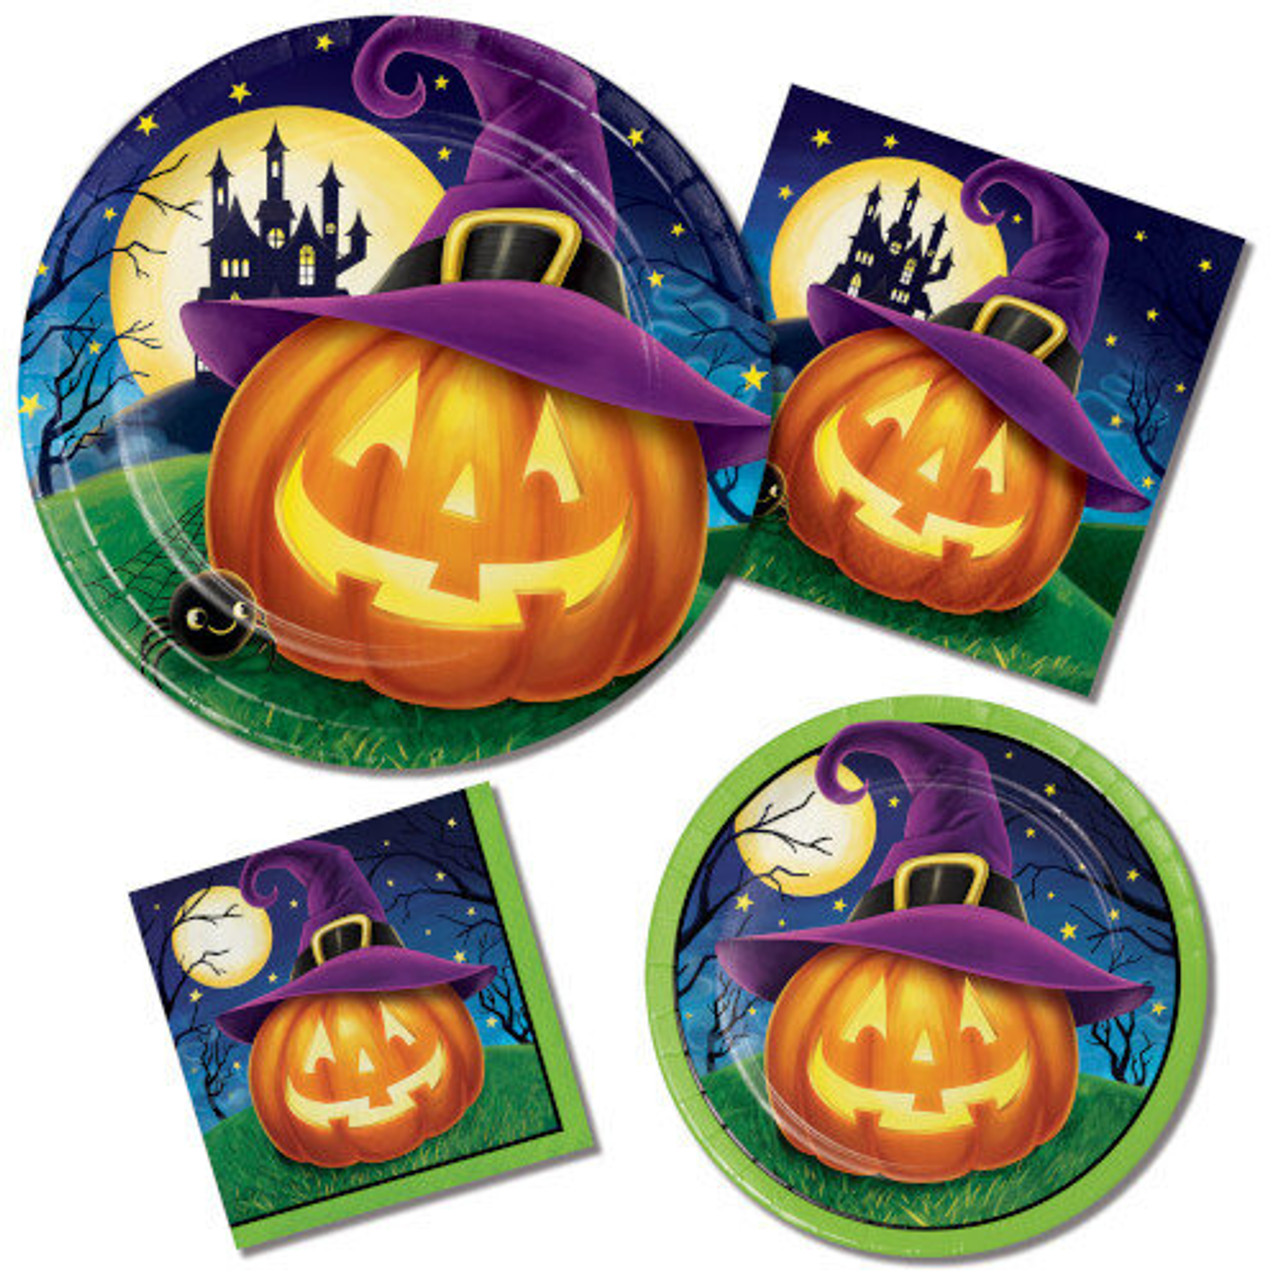 https://cdn11.bigcommerce.com/s-hgqmwywp99/images/stencil/1280x1280/products/50395/45181/halloween-october-eve-6-75-dessert-paper-plates-8ct-1__88119.1675880387.jpg?c=1?imbypass=on